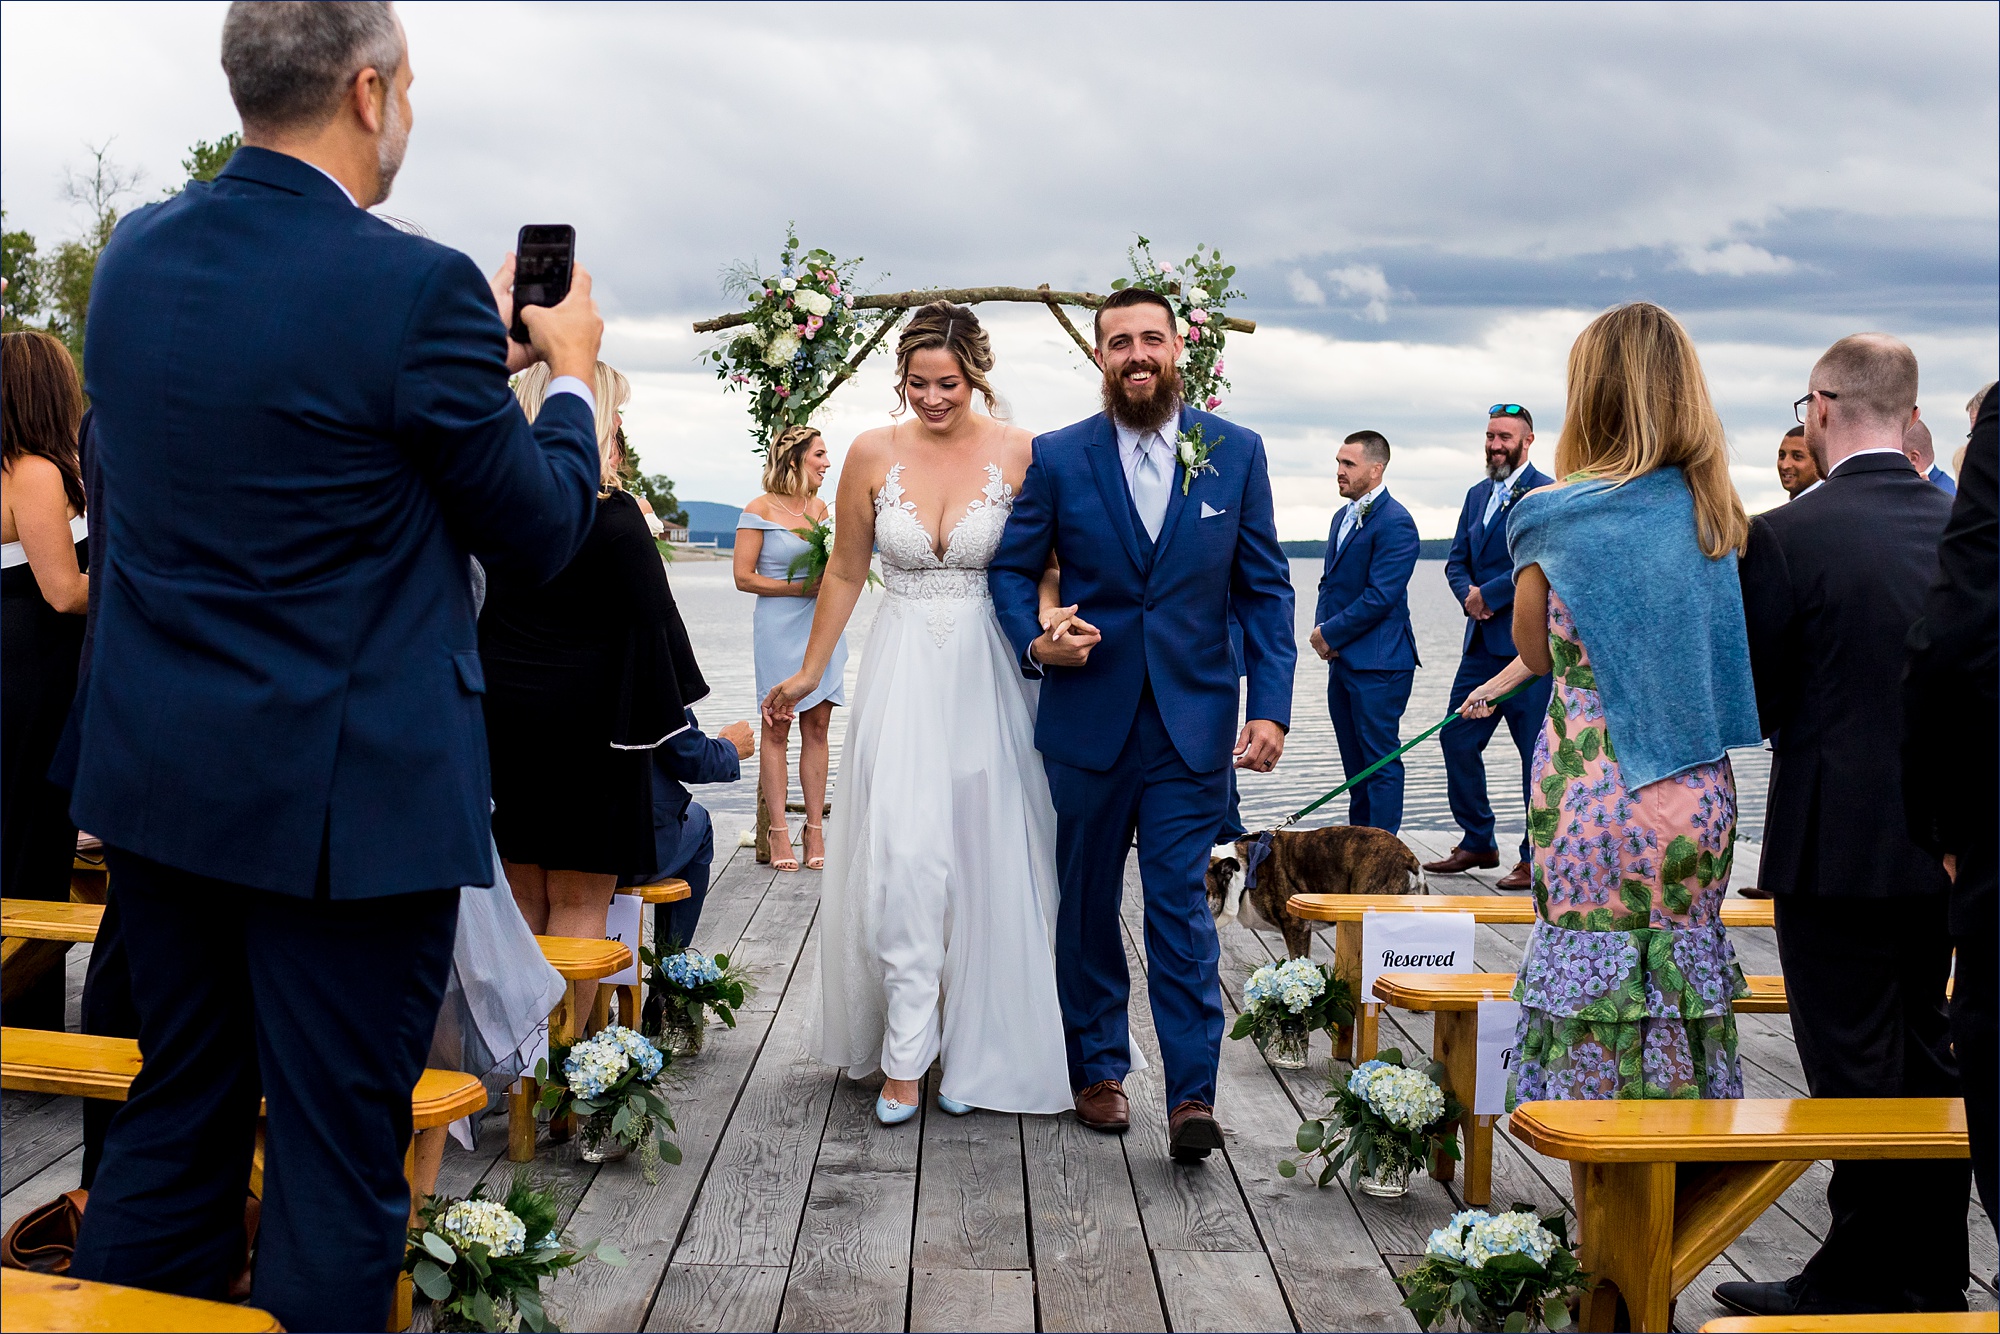 The newly married couple walks back up the dock after being officially married in Maine